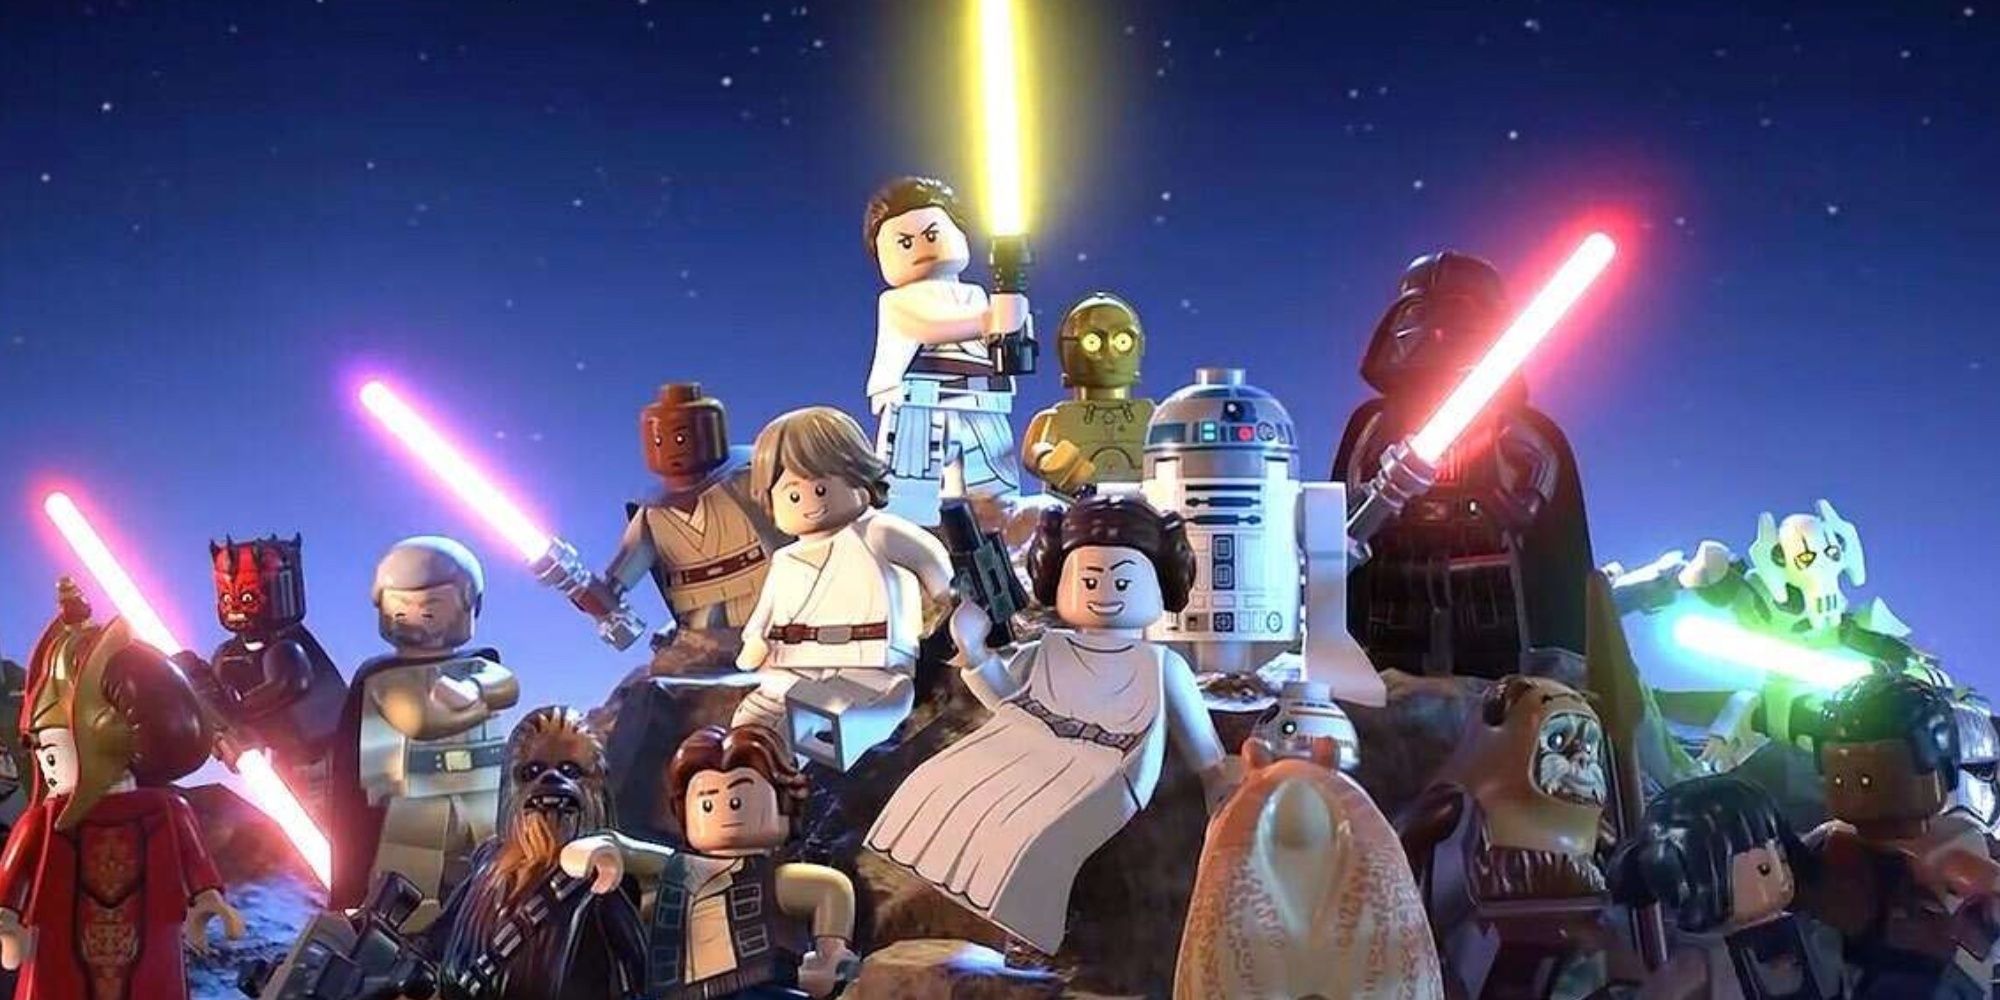 All Star Wars Lego characters pose together for a group photo.